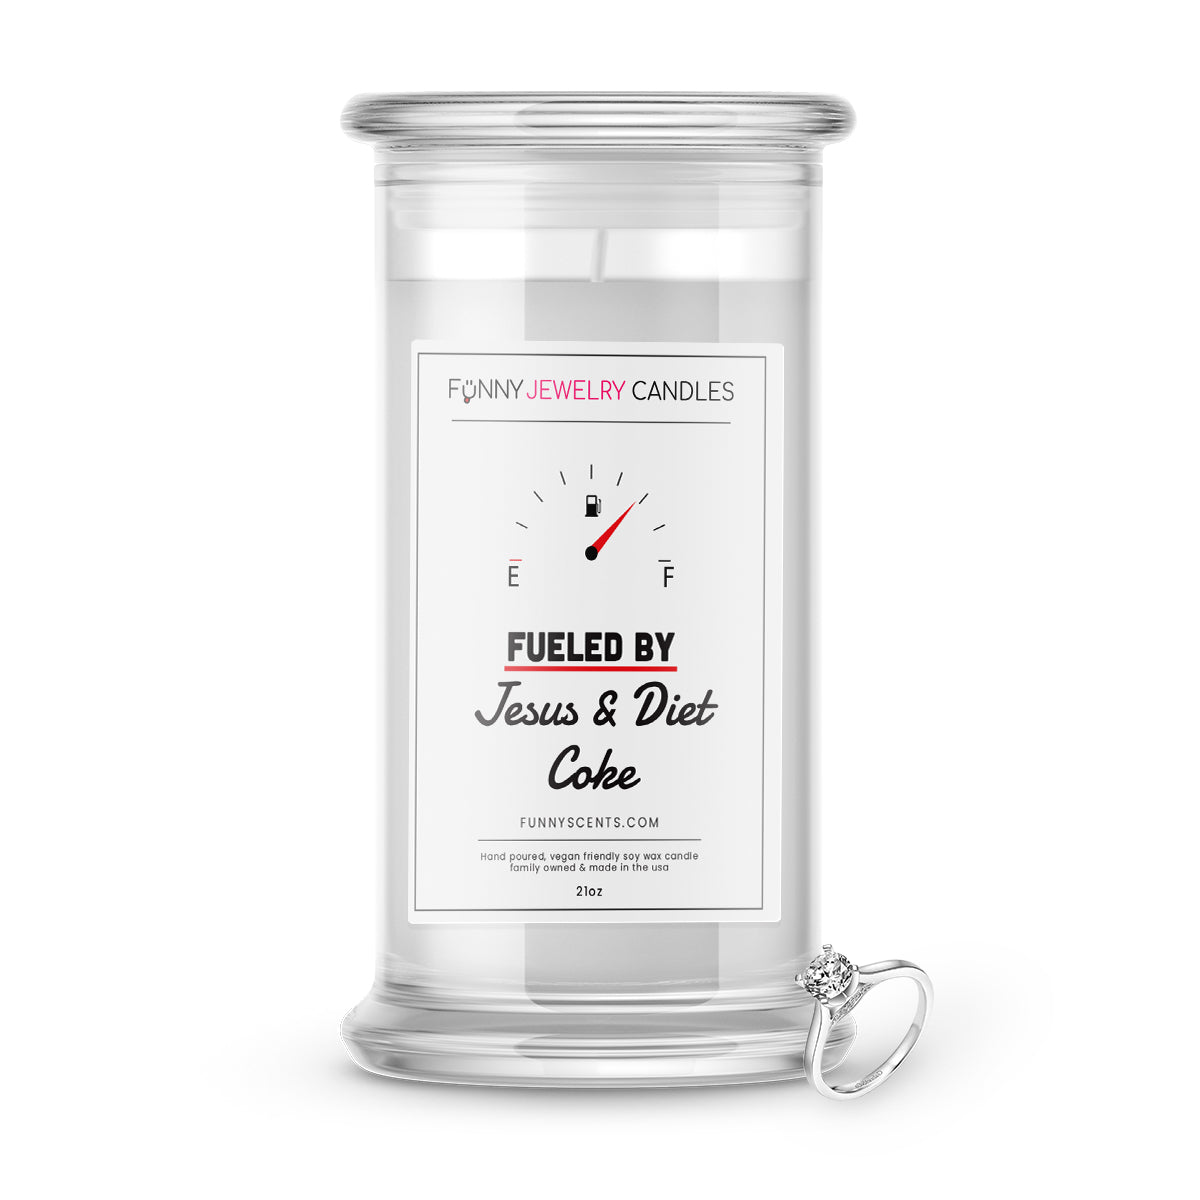 Fueled By Jesus and Diet Coke Jewelry Funny Candles